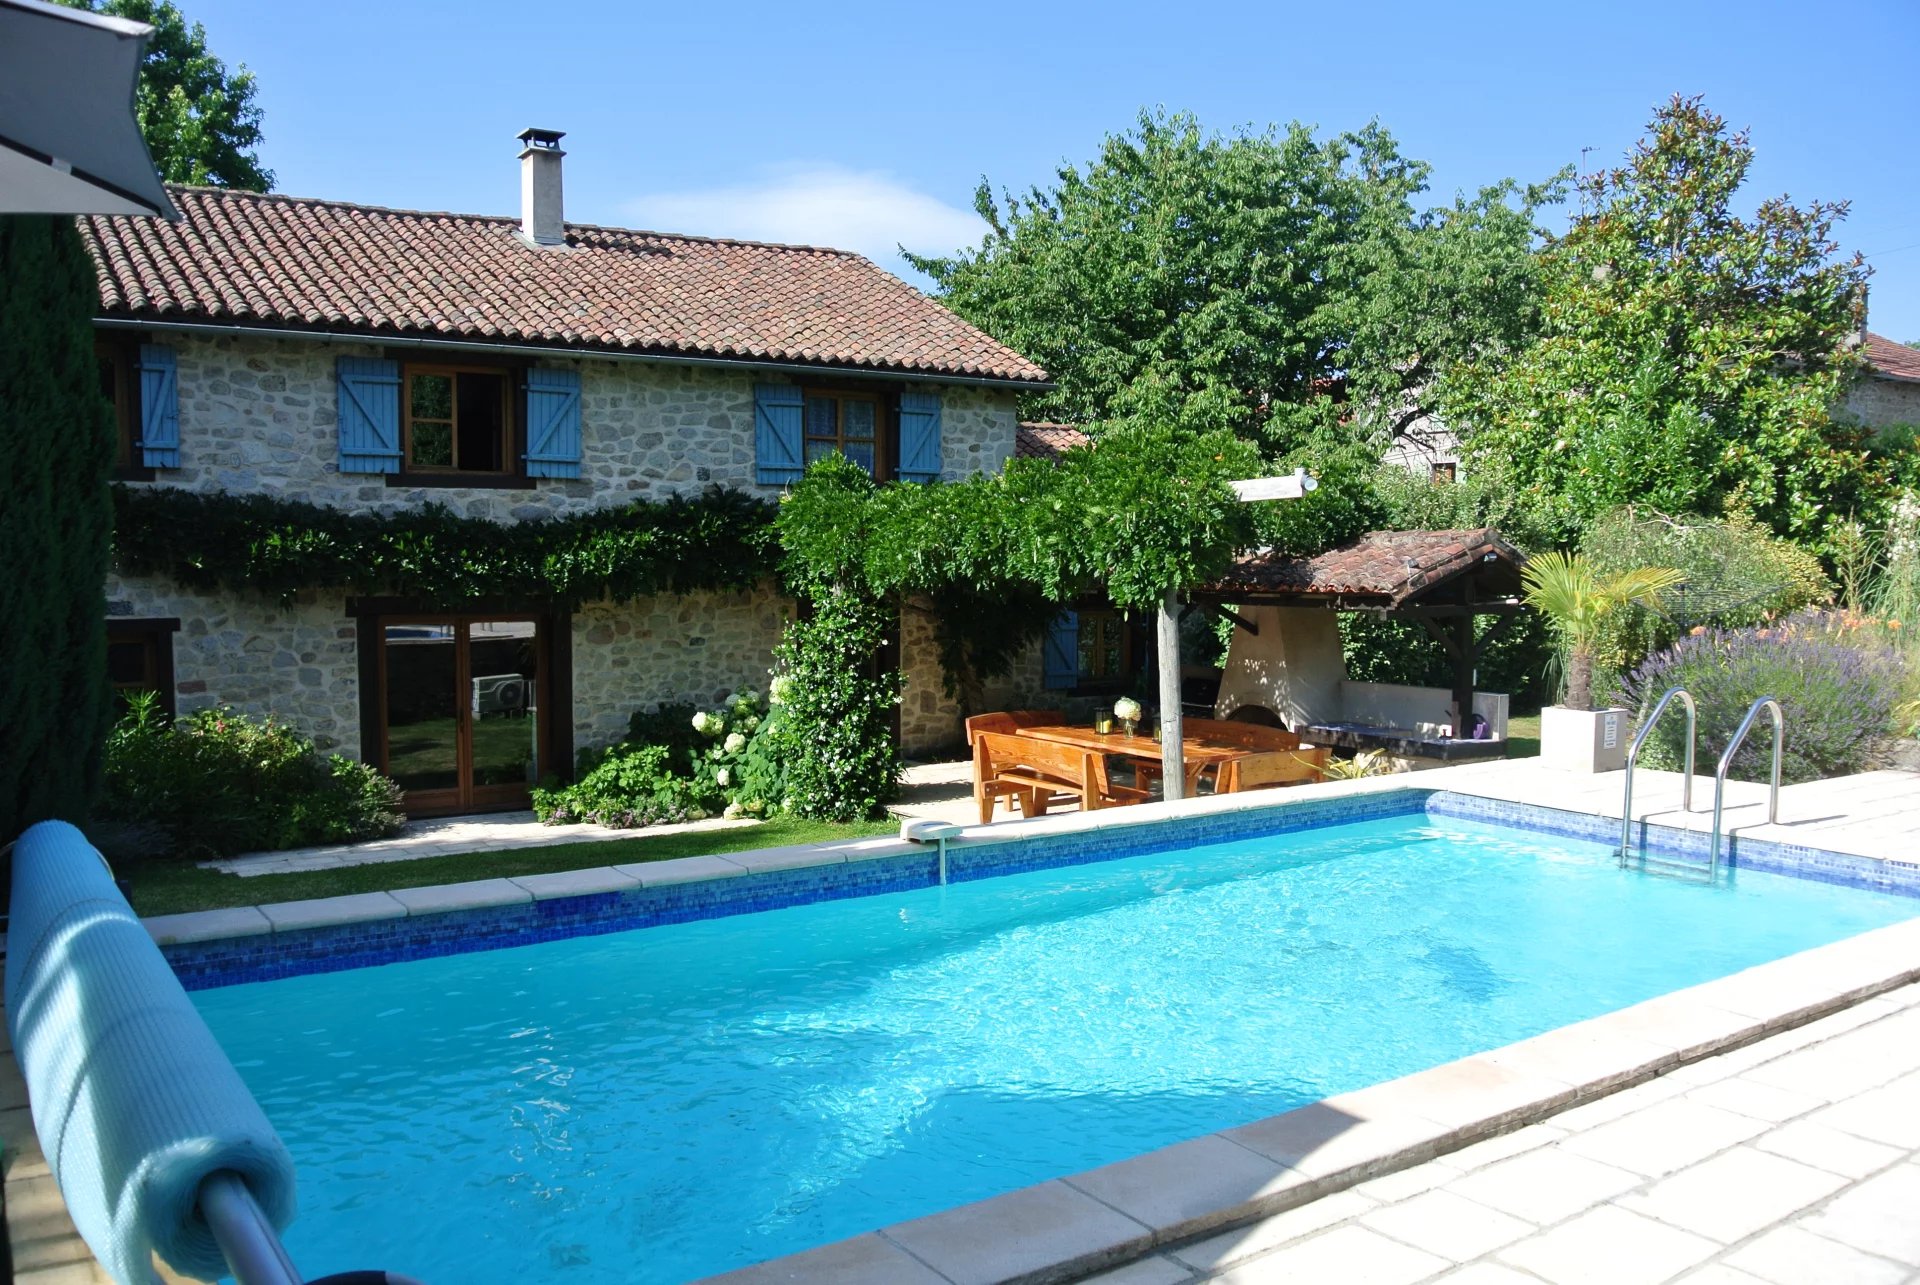 Gorgeous 5 bed house, pool and gite - revenue potential